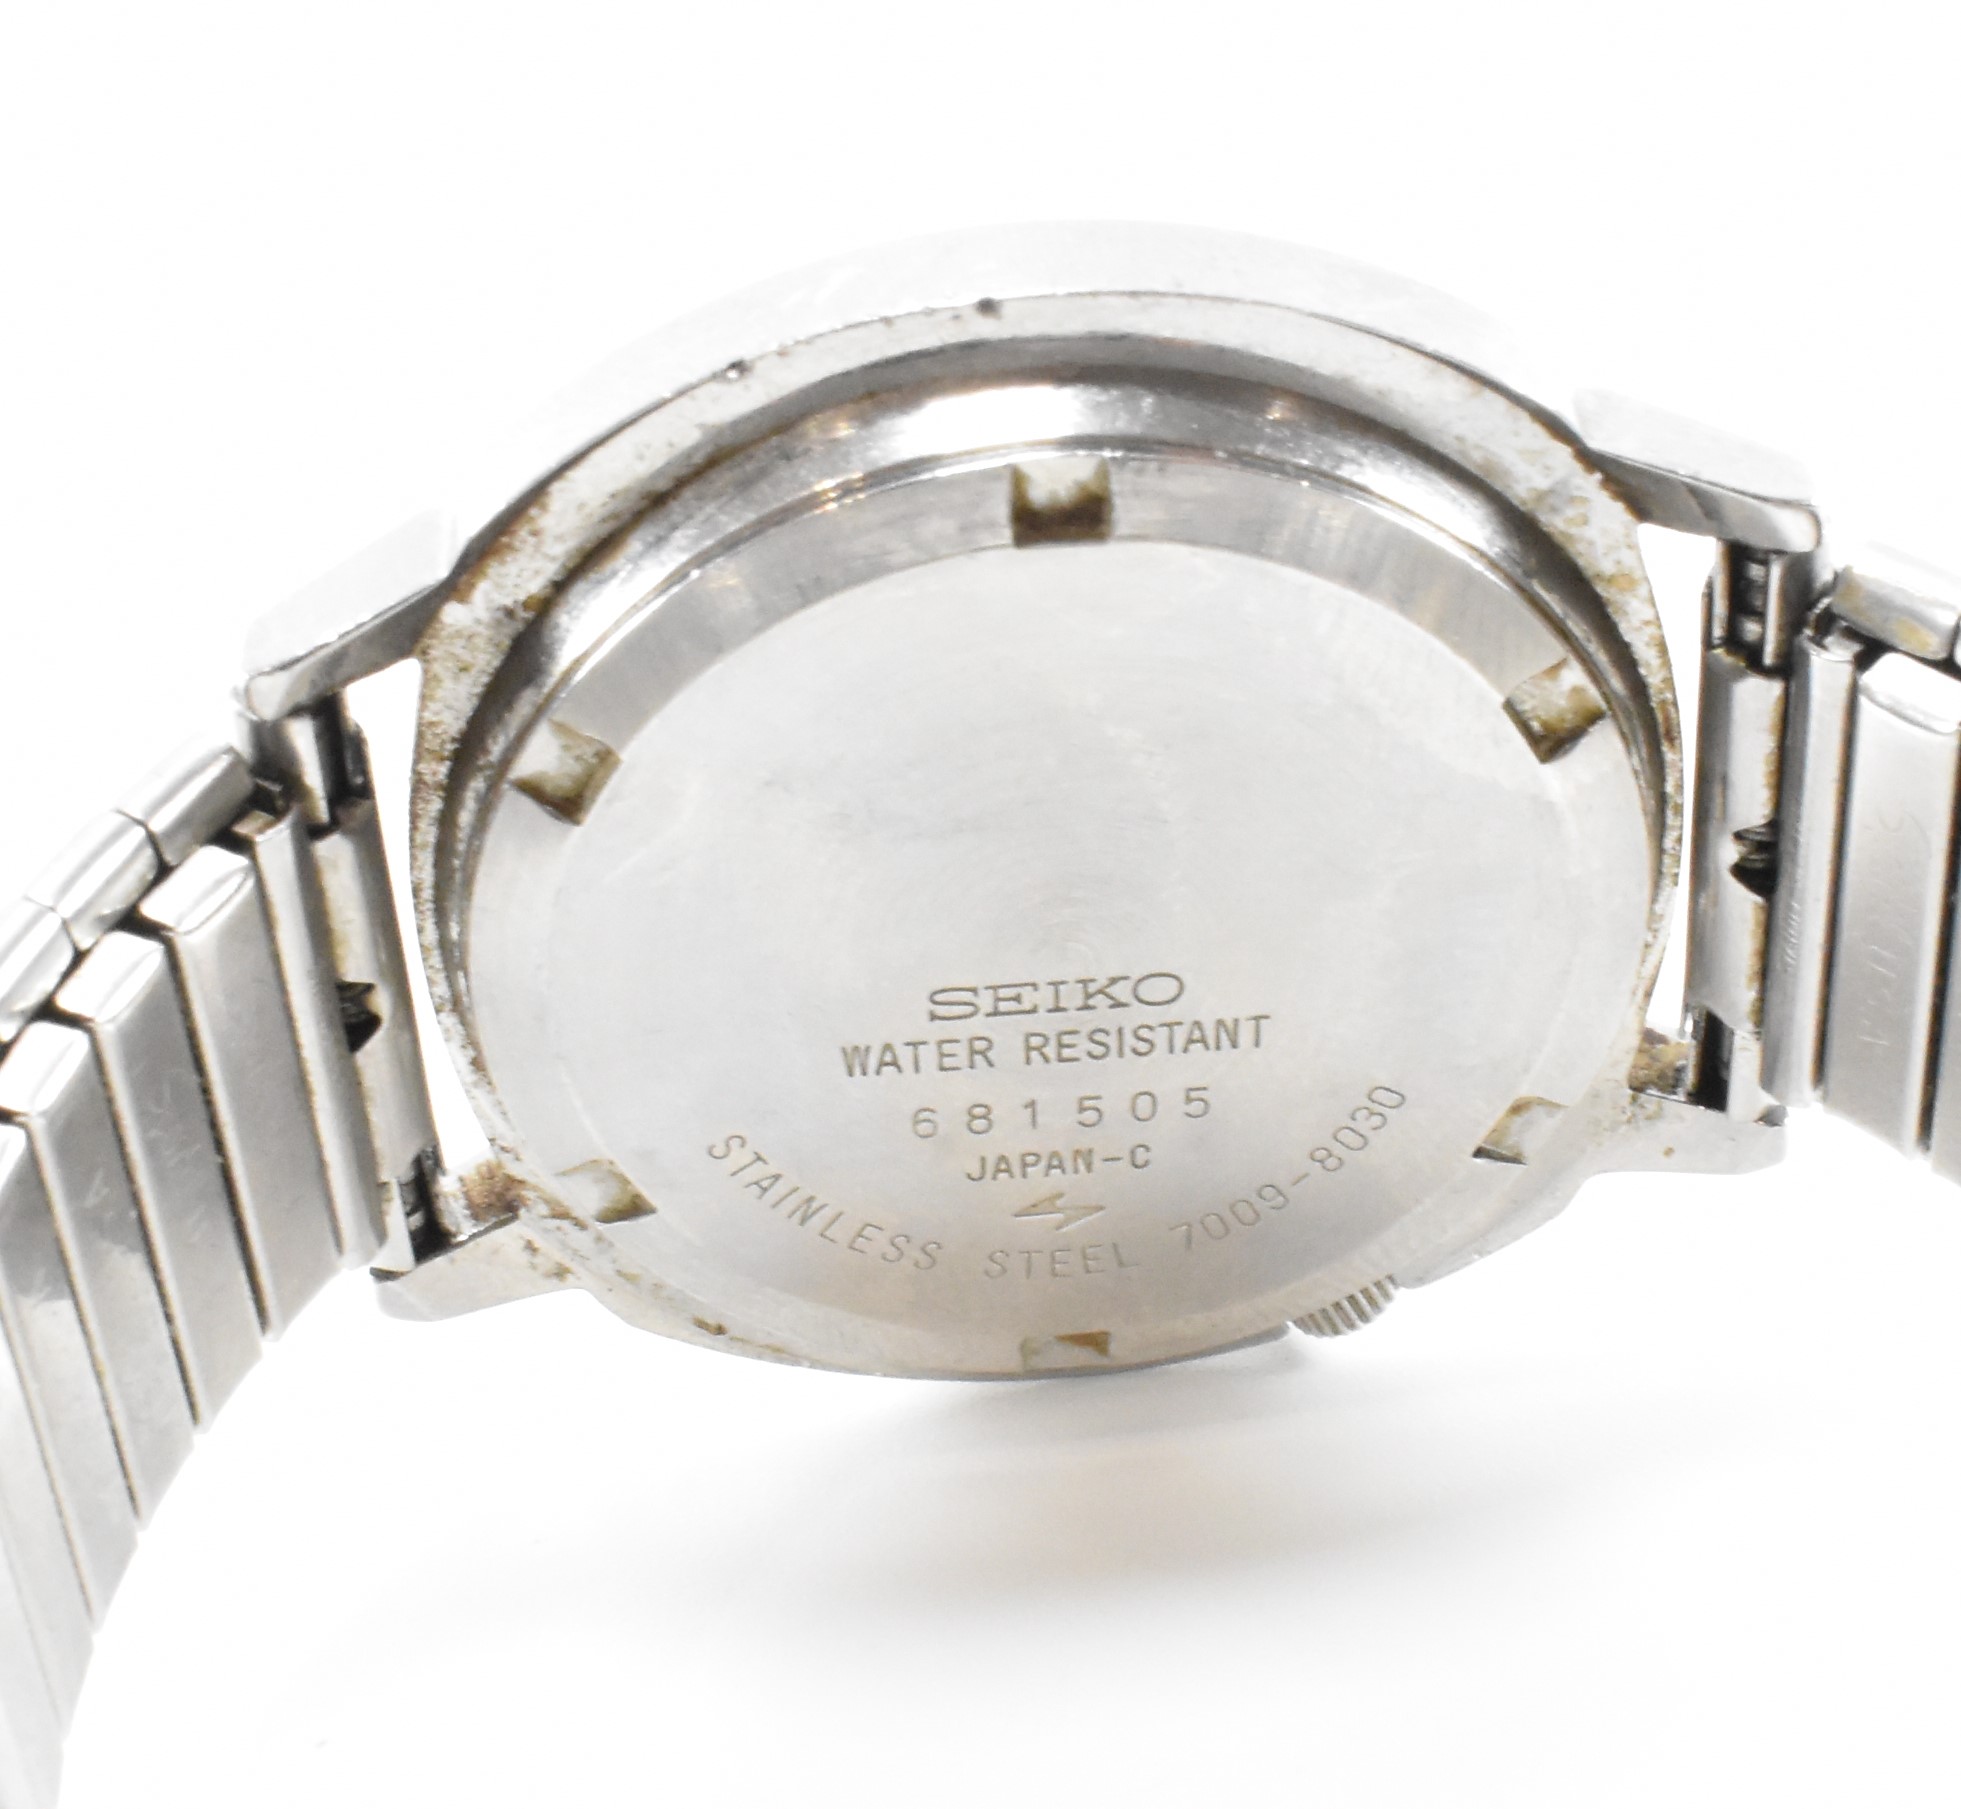 SEIKO AUTOMATIC STAINLESS STEEL WRIST WATCH - Image 3 of 5